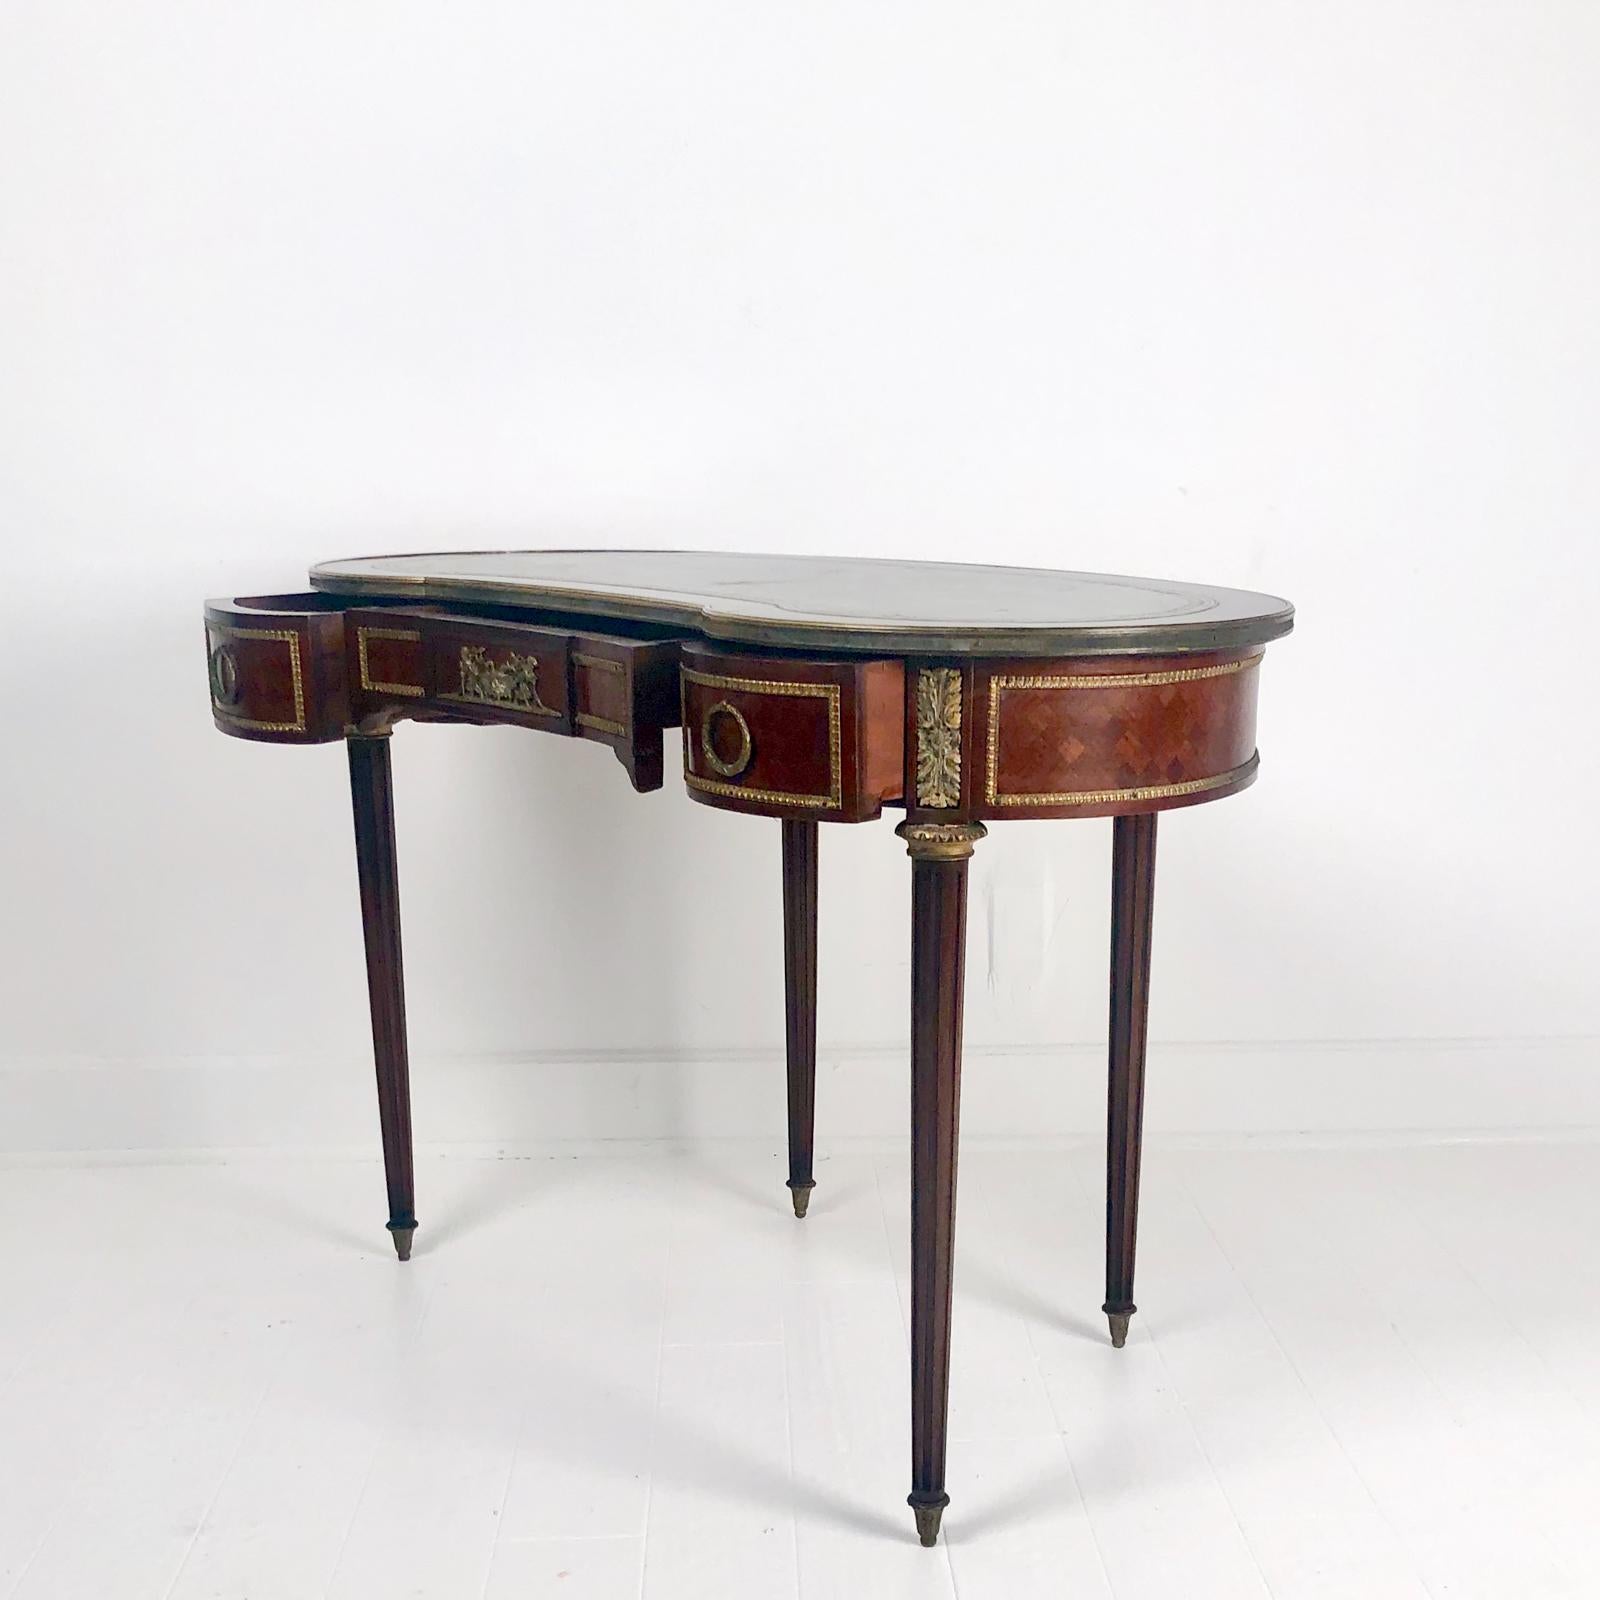 An early 20th century Louis XVI style French kidney shaped desk or dressing table, with a leather top and 3 drawers, circa 1920.

